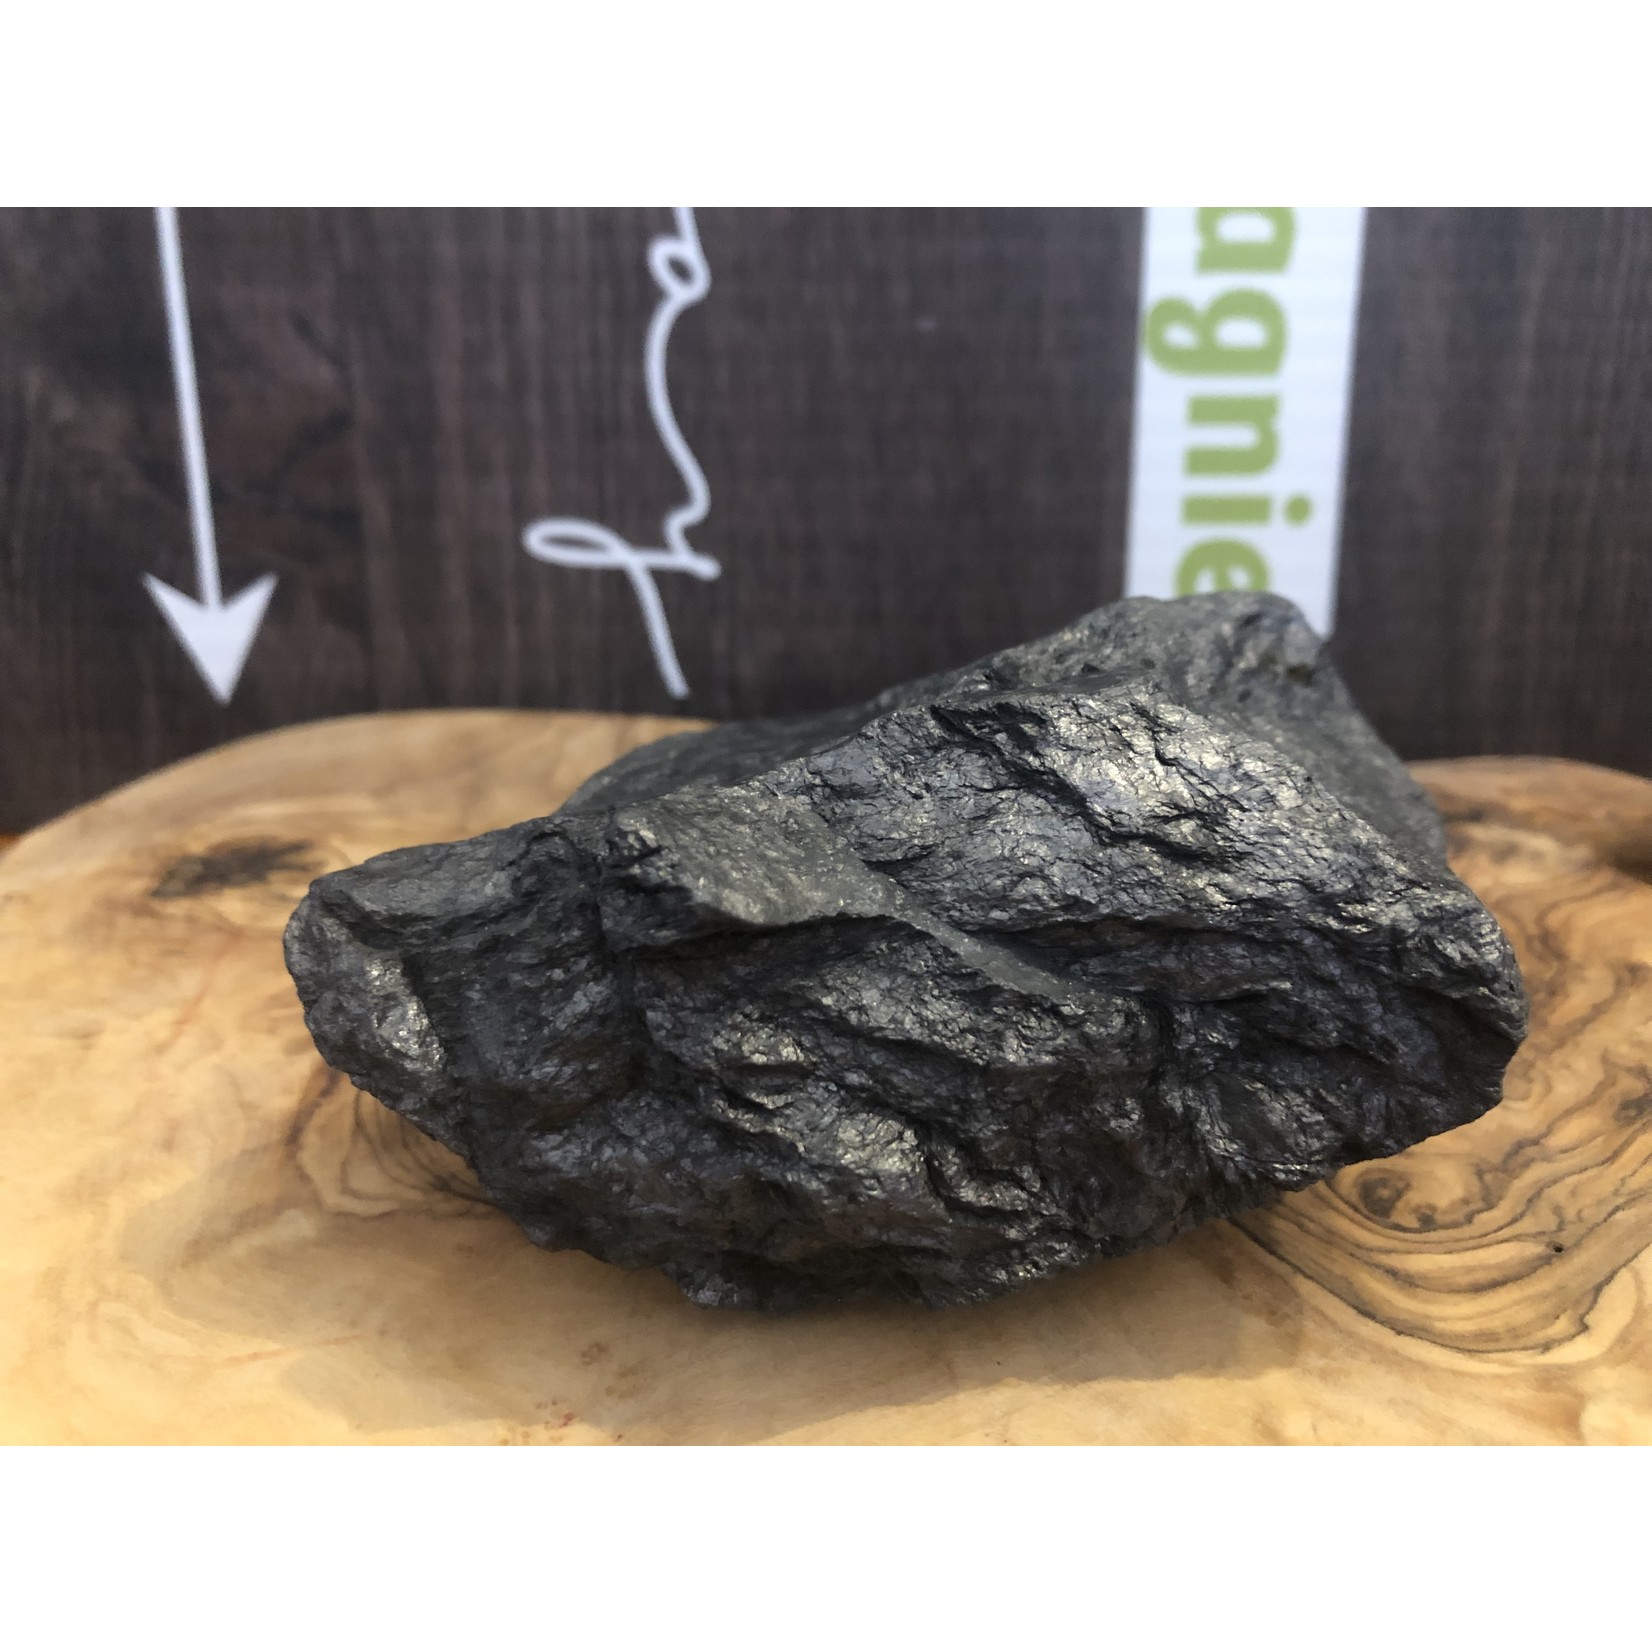 extra large natural shungite rock, has a unique and remarkable ability, neutralizes electromagnetic disturbances harmful to health